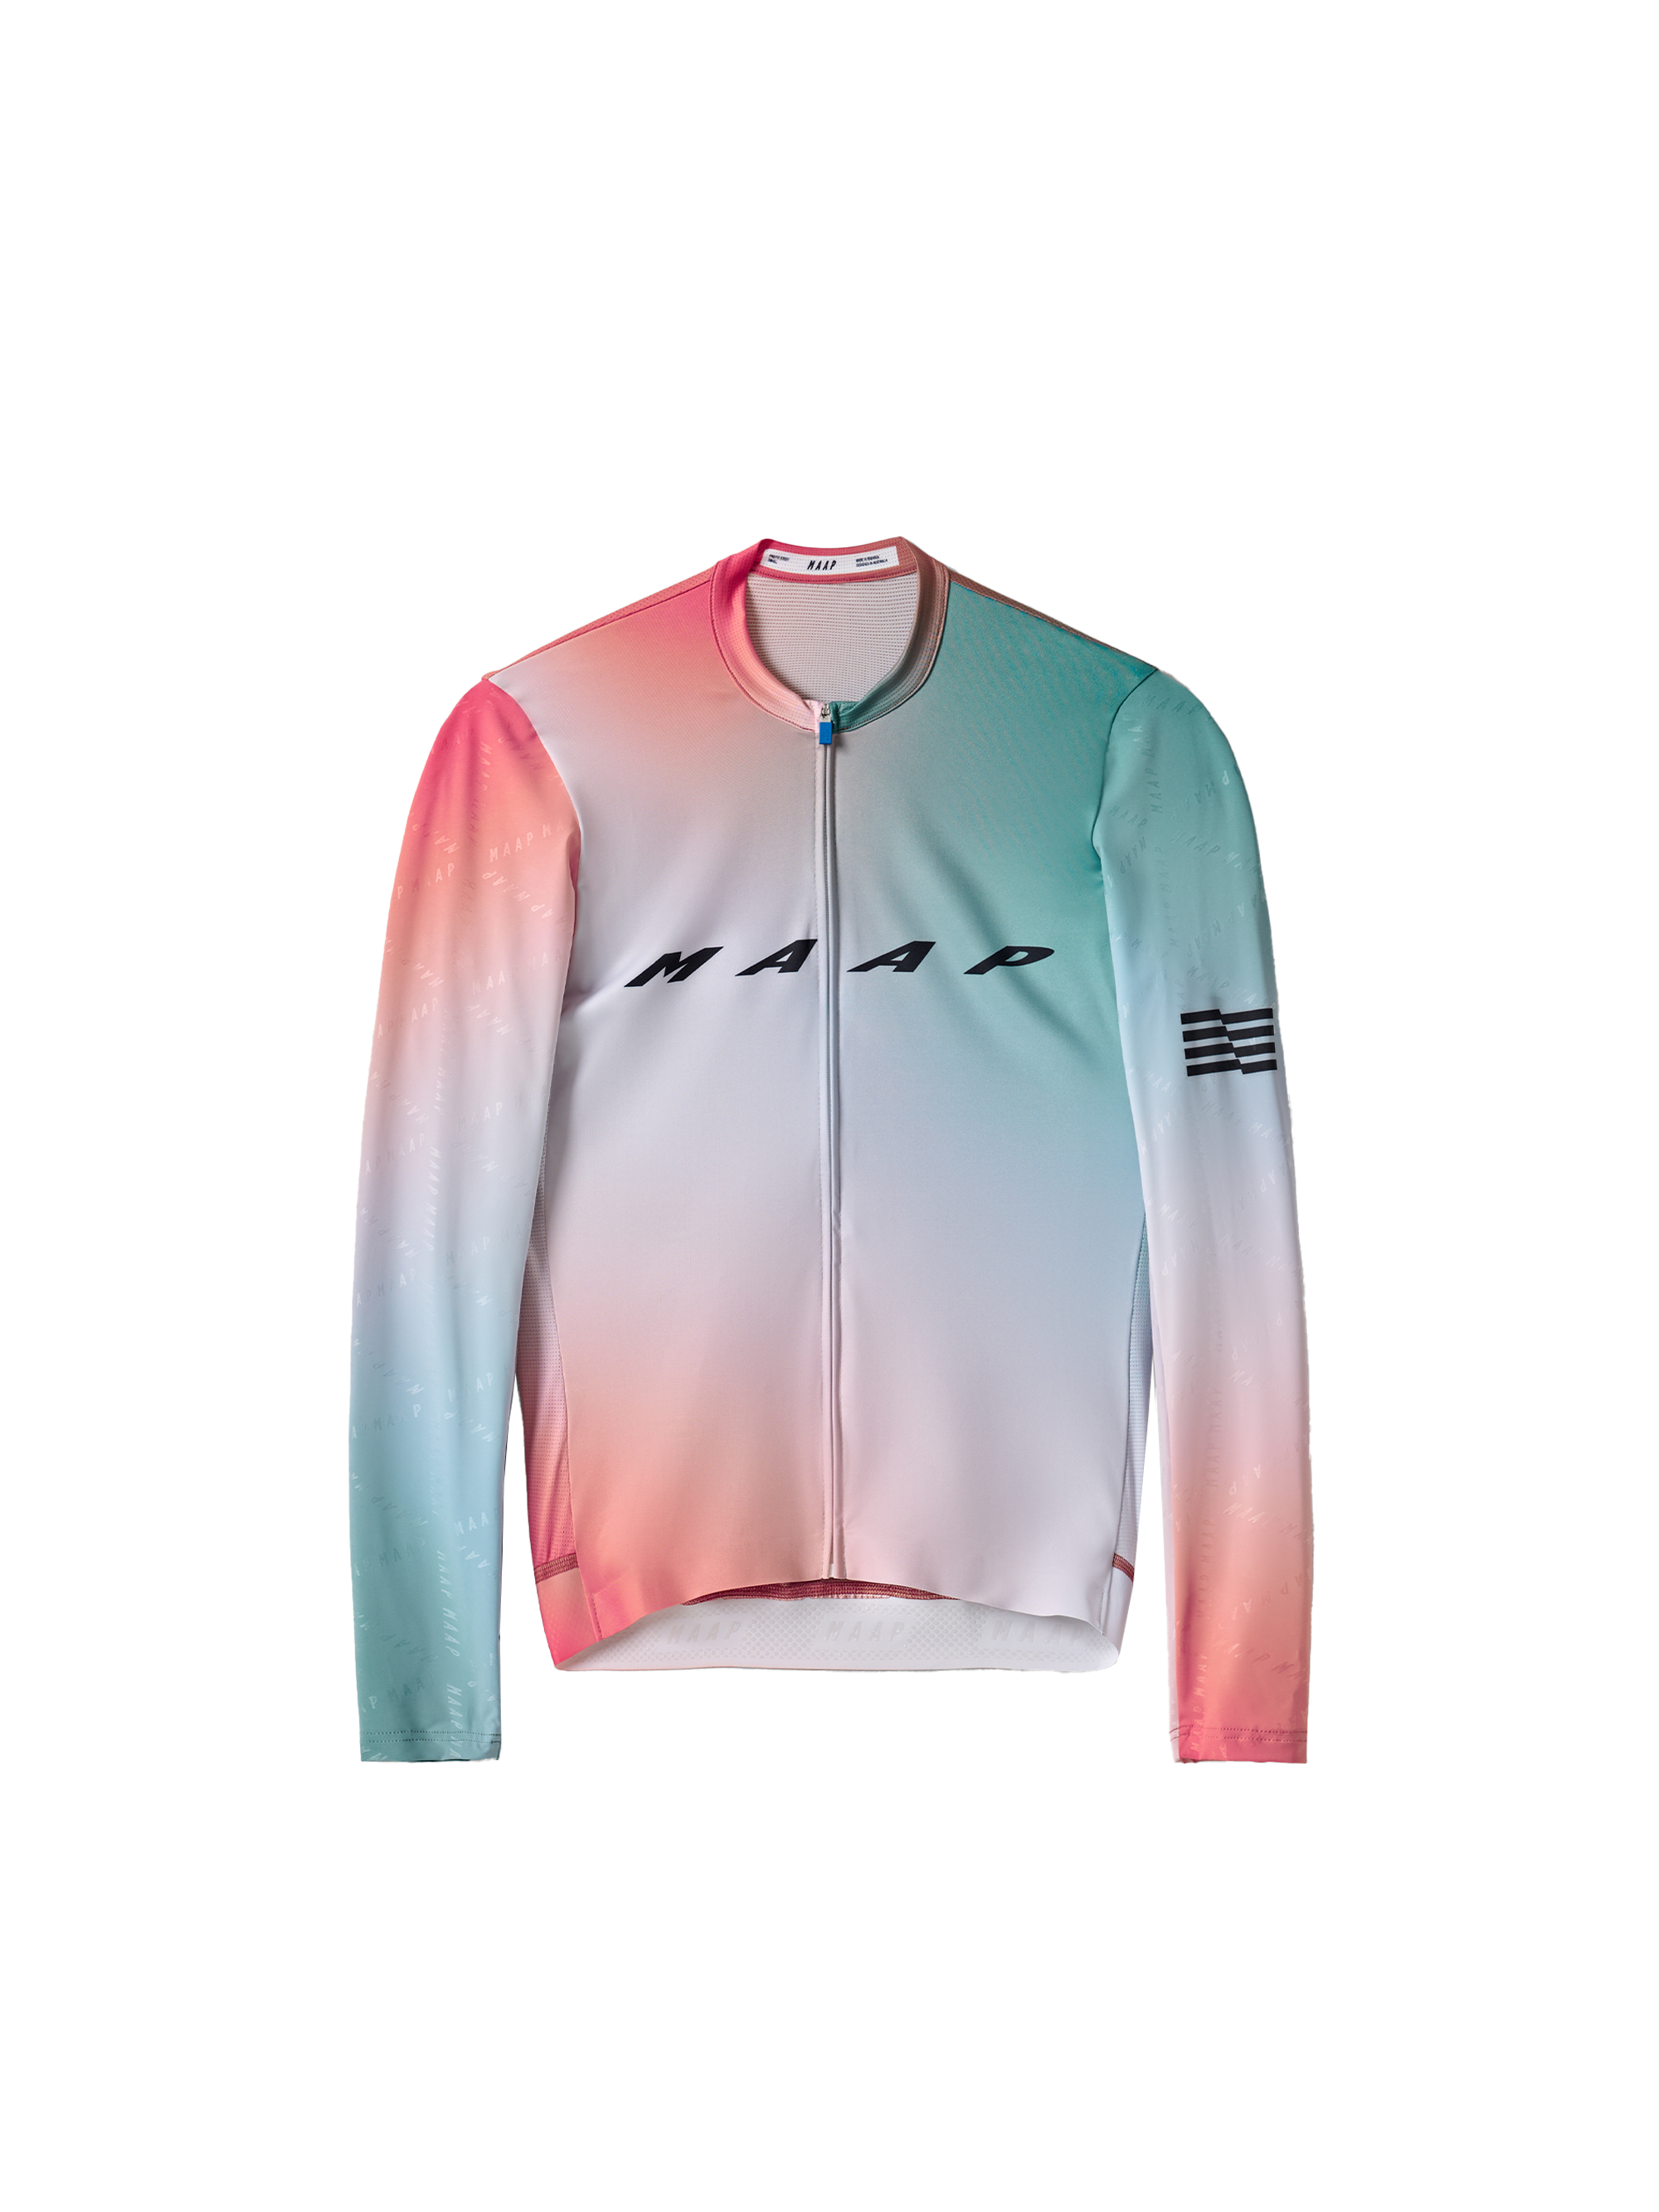 Maillot Pro Hex LS 2.0 - Flamme